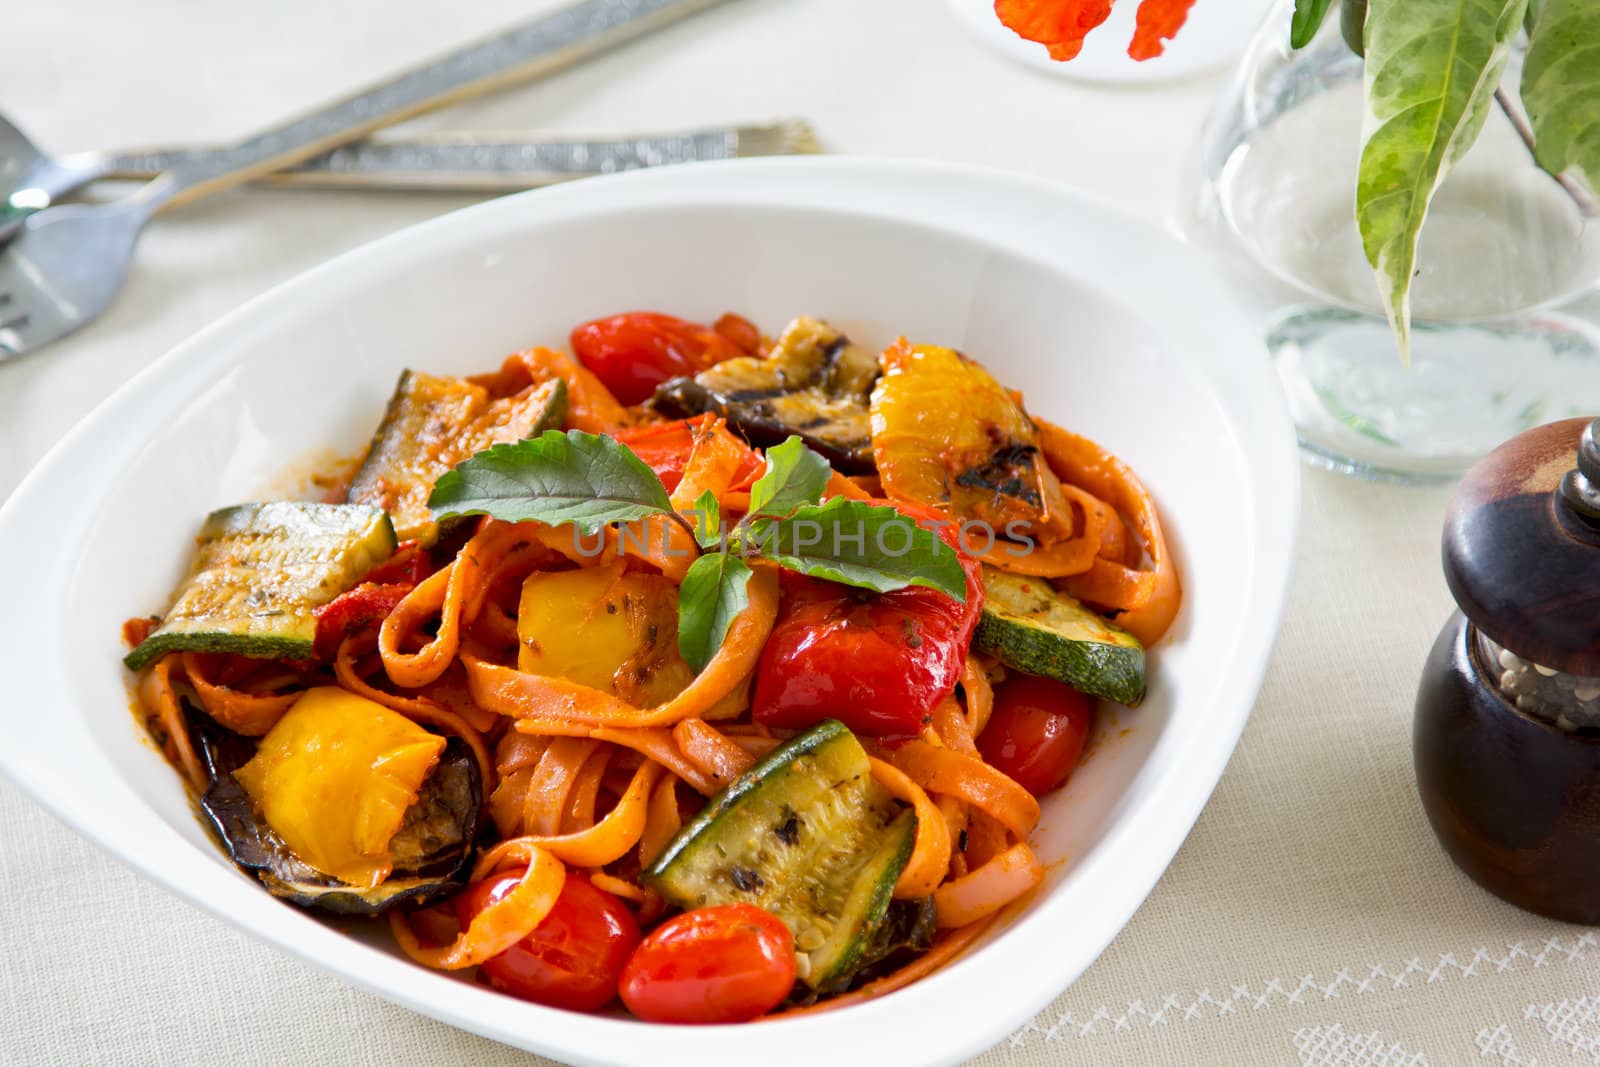 Fettuccine with Grilled vegetables by vanillaechoes